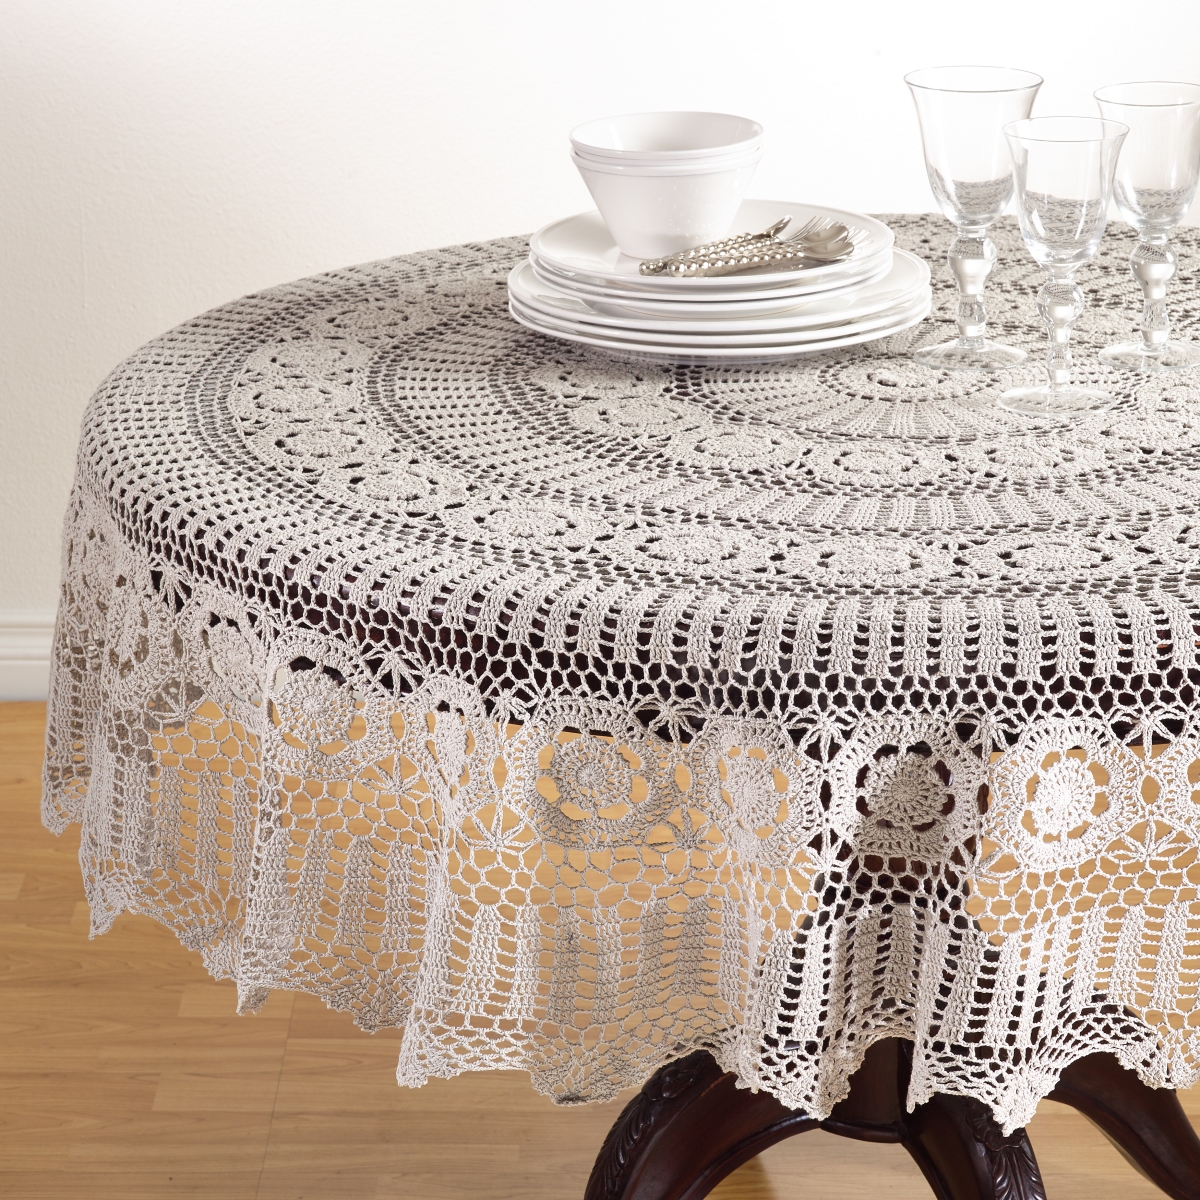 869.gy72r 72 In. Round Handmade Crochet Cotton Lace Table Linens - Grey